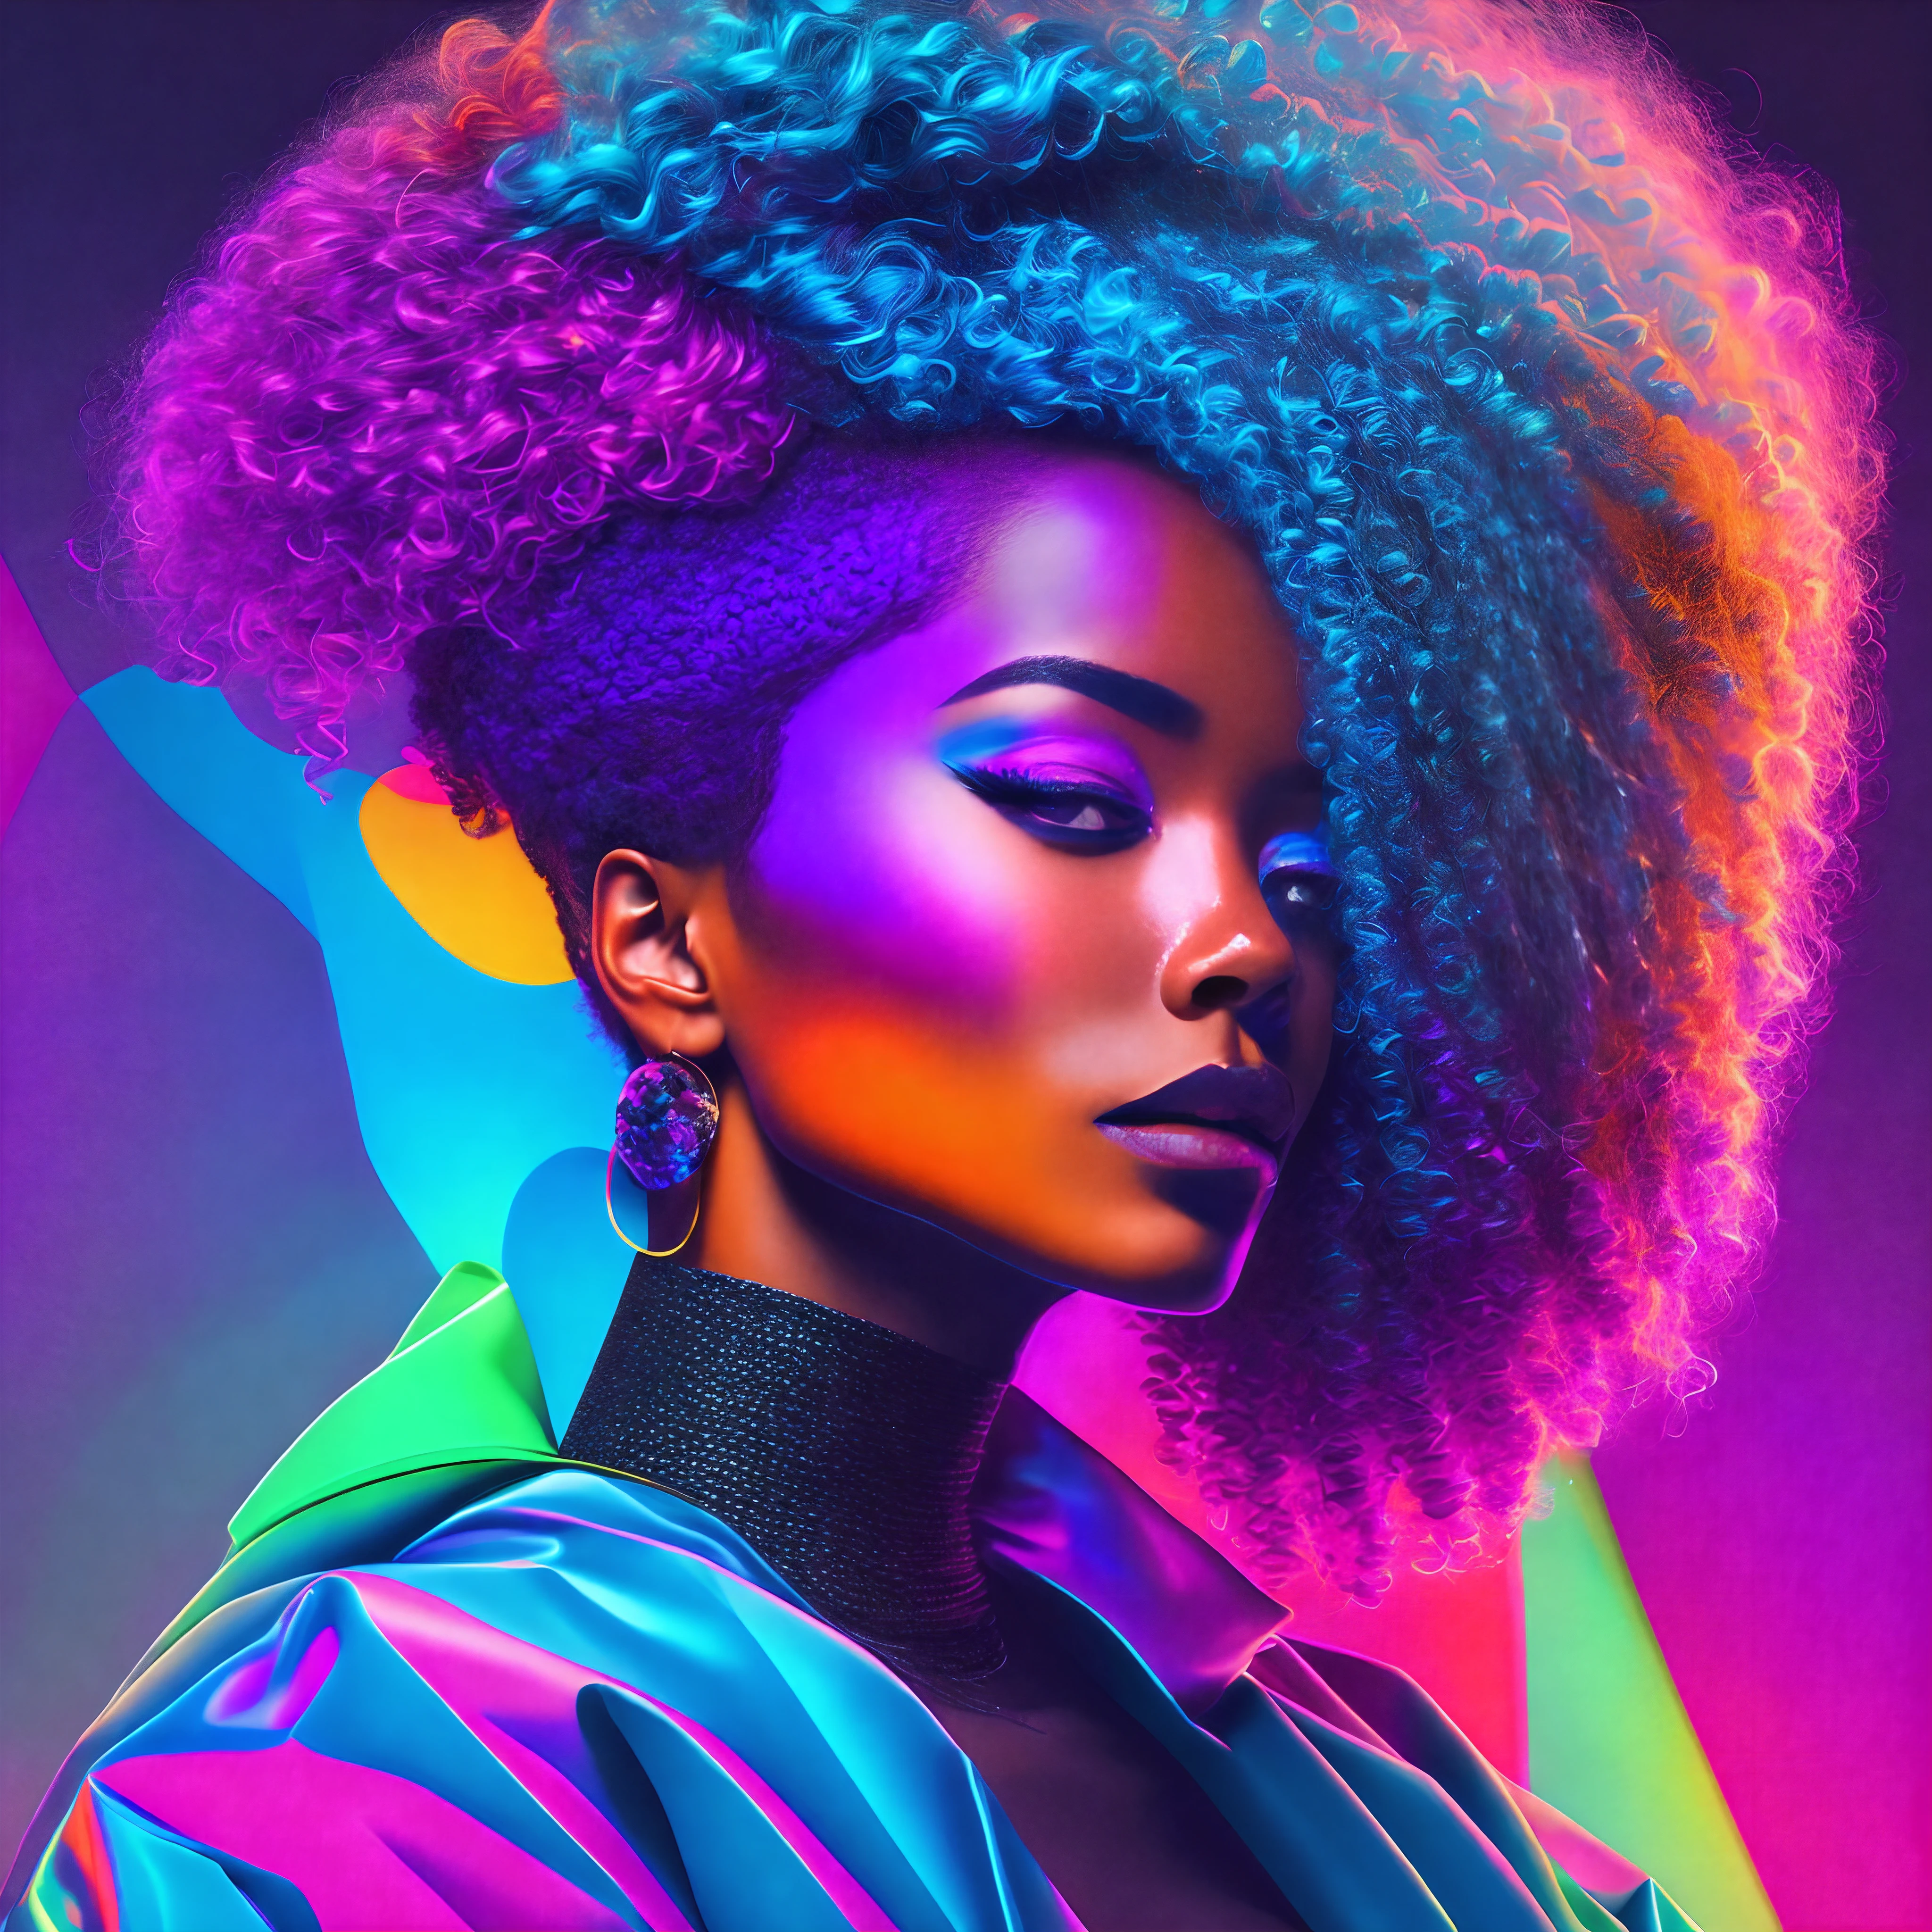 a woman with afro colored mookano hair and earrings, high colored texture, portrait color glamour, detailed color portrait, neon color bleed, high-quality portrait, colorized portrait, ultraviolet and neon colors, color studio portrait, full-colour illustration, vibrant colors hyper realism, vibrant neon colors, pop and vibrant colors, cor neon, colorful fashion, cyberpunk style color, iridescent illustration